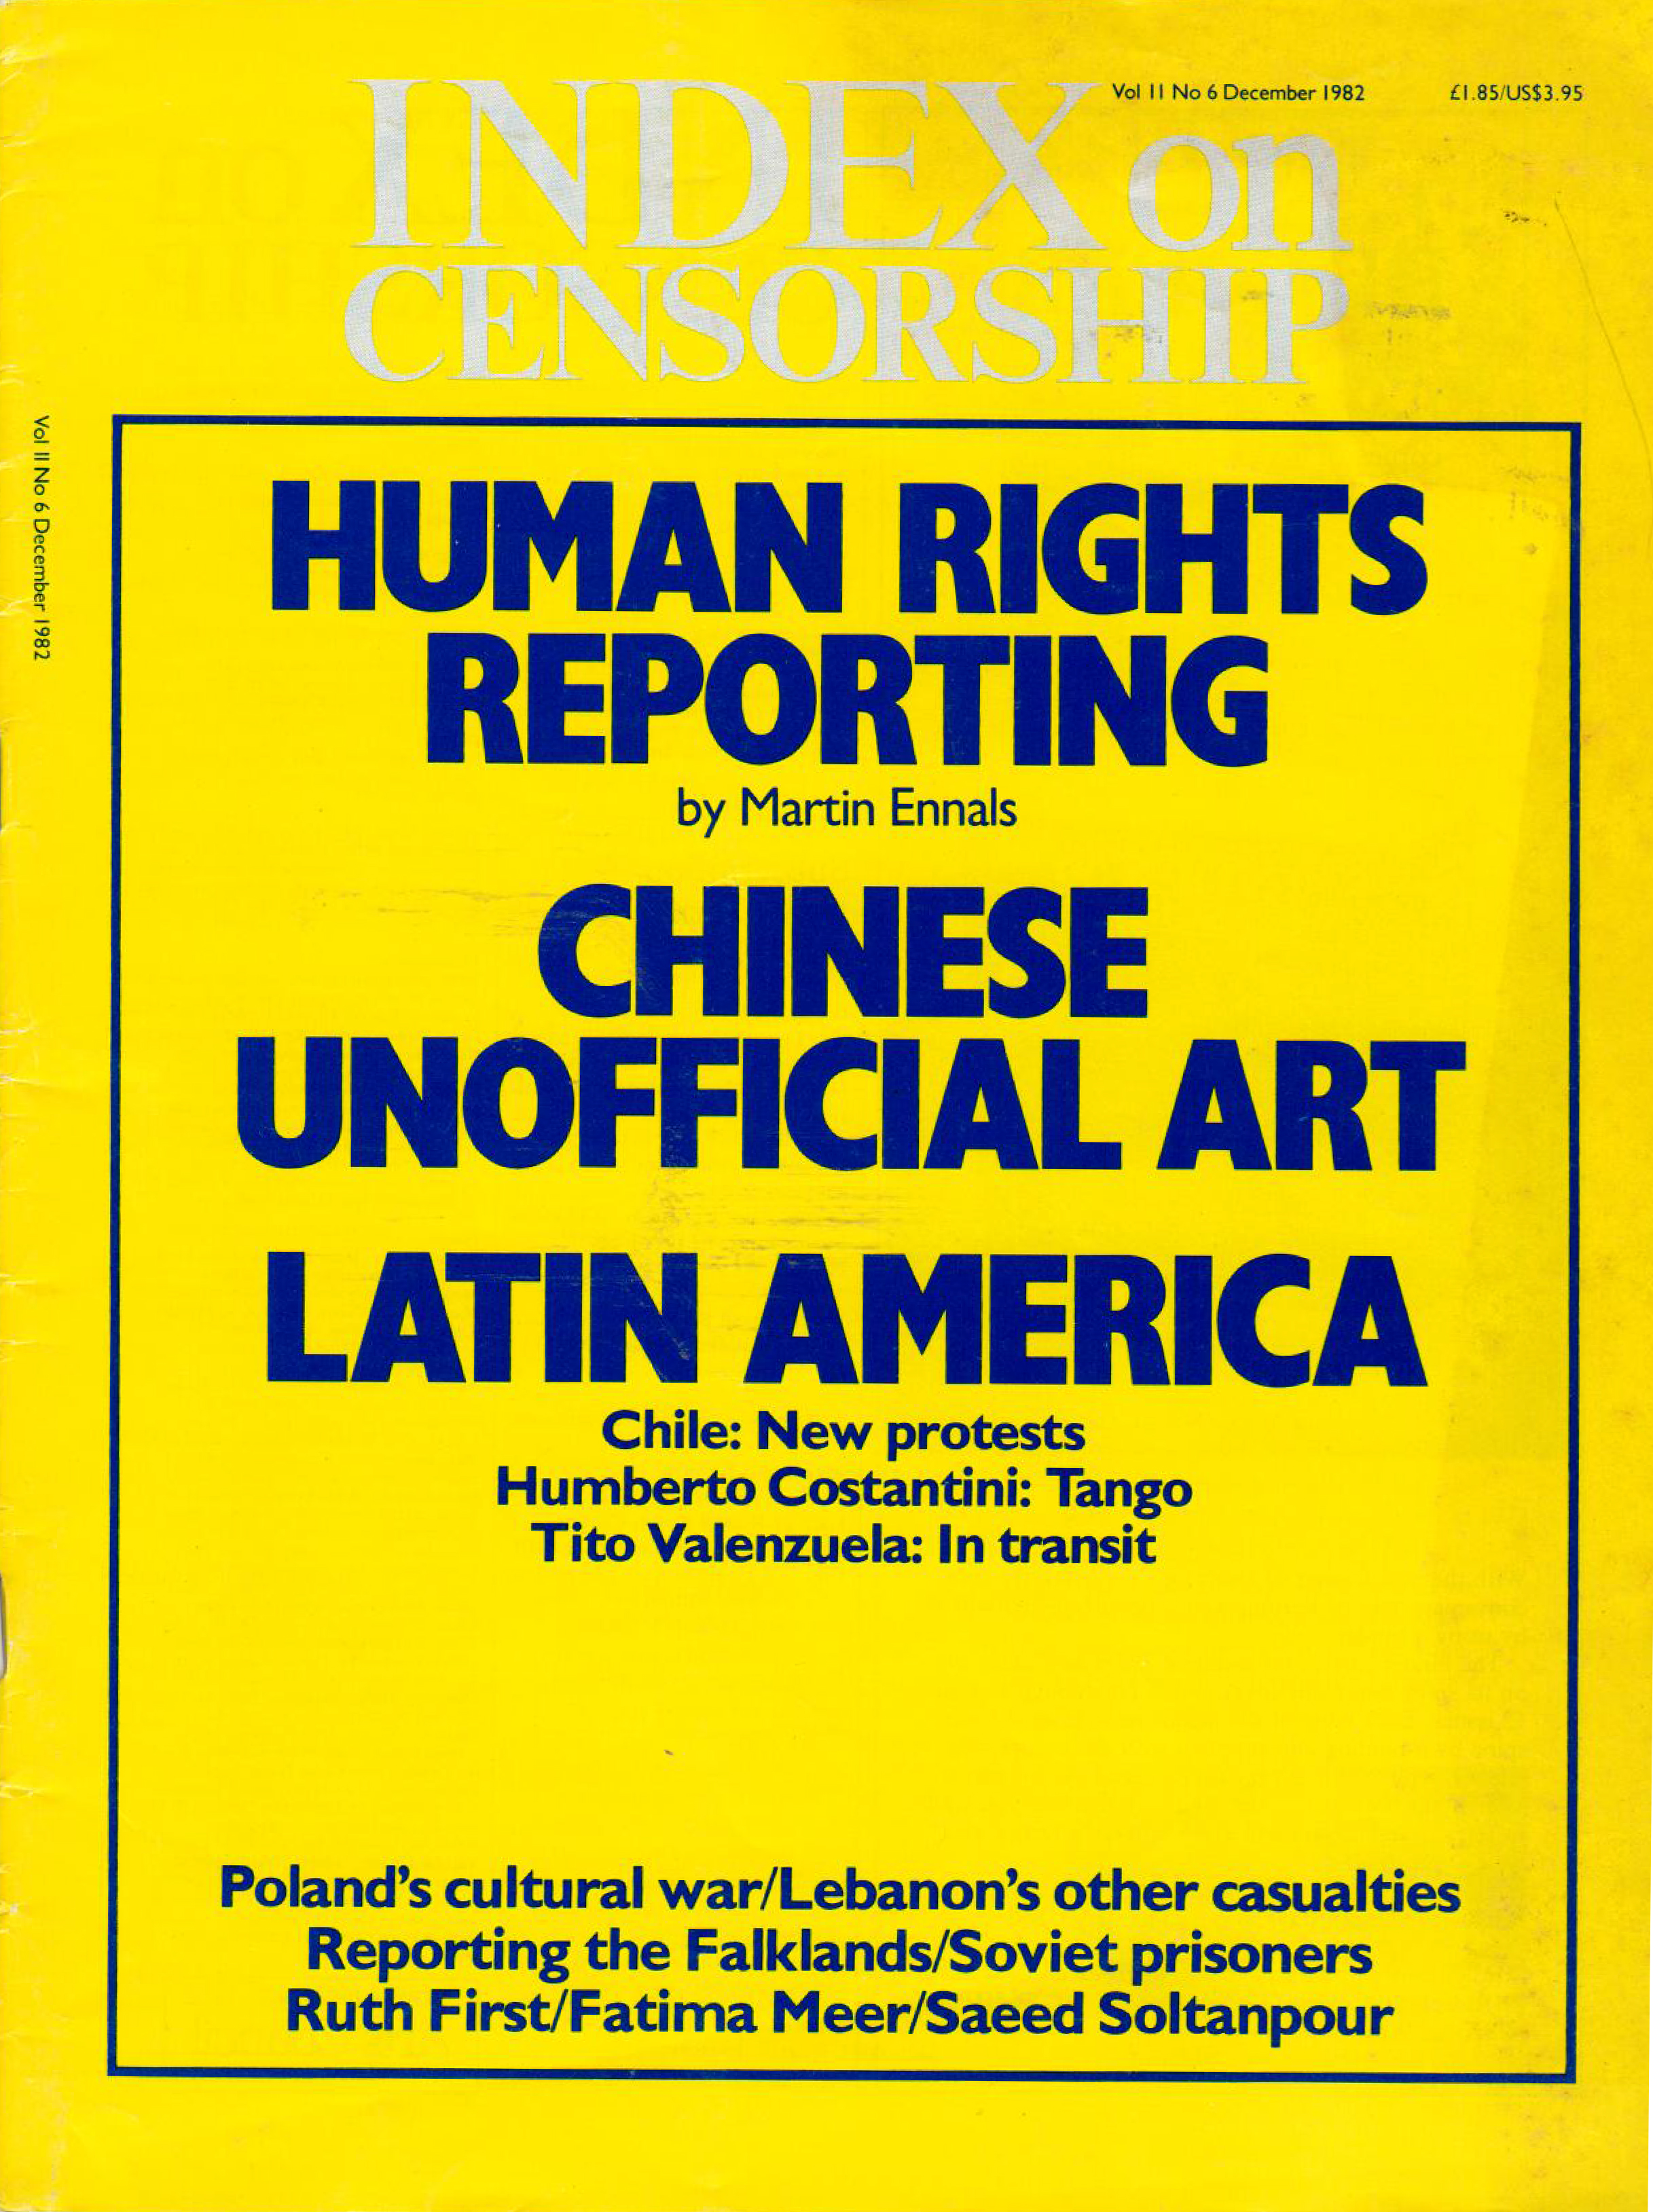 Human rights reporting, the December 1982 issue of Index on Censorship magazine